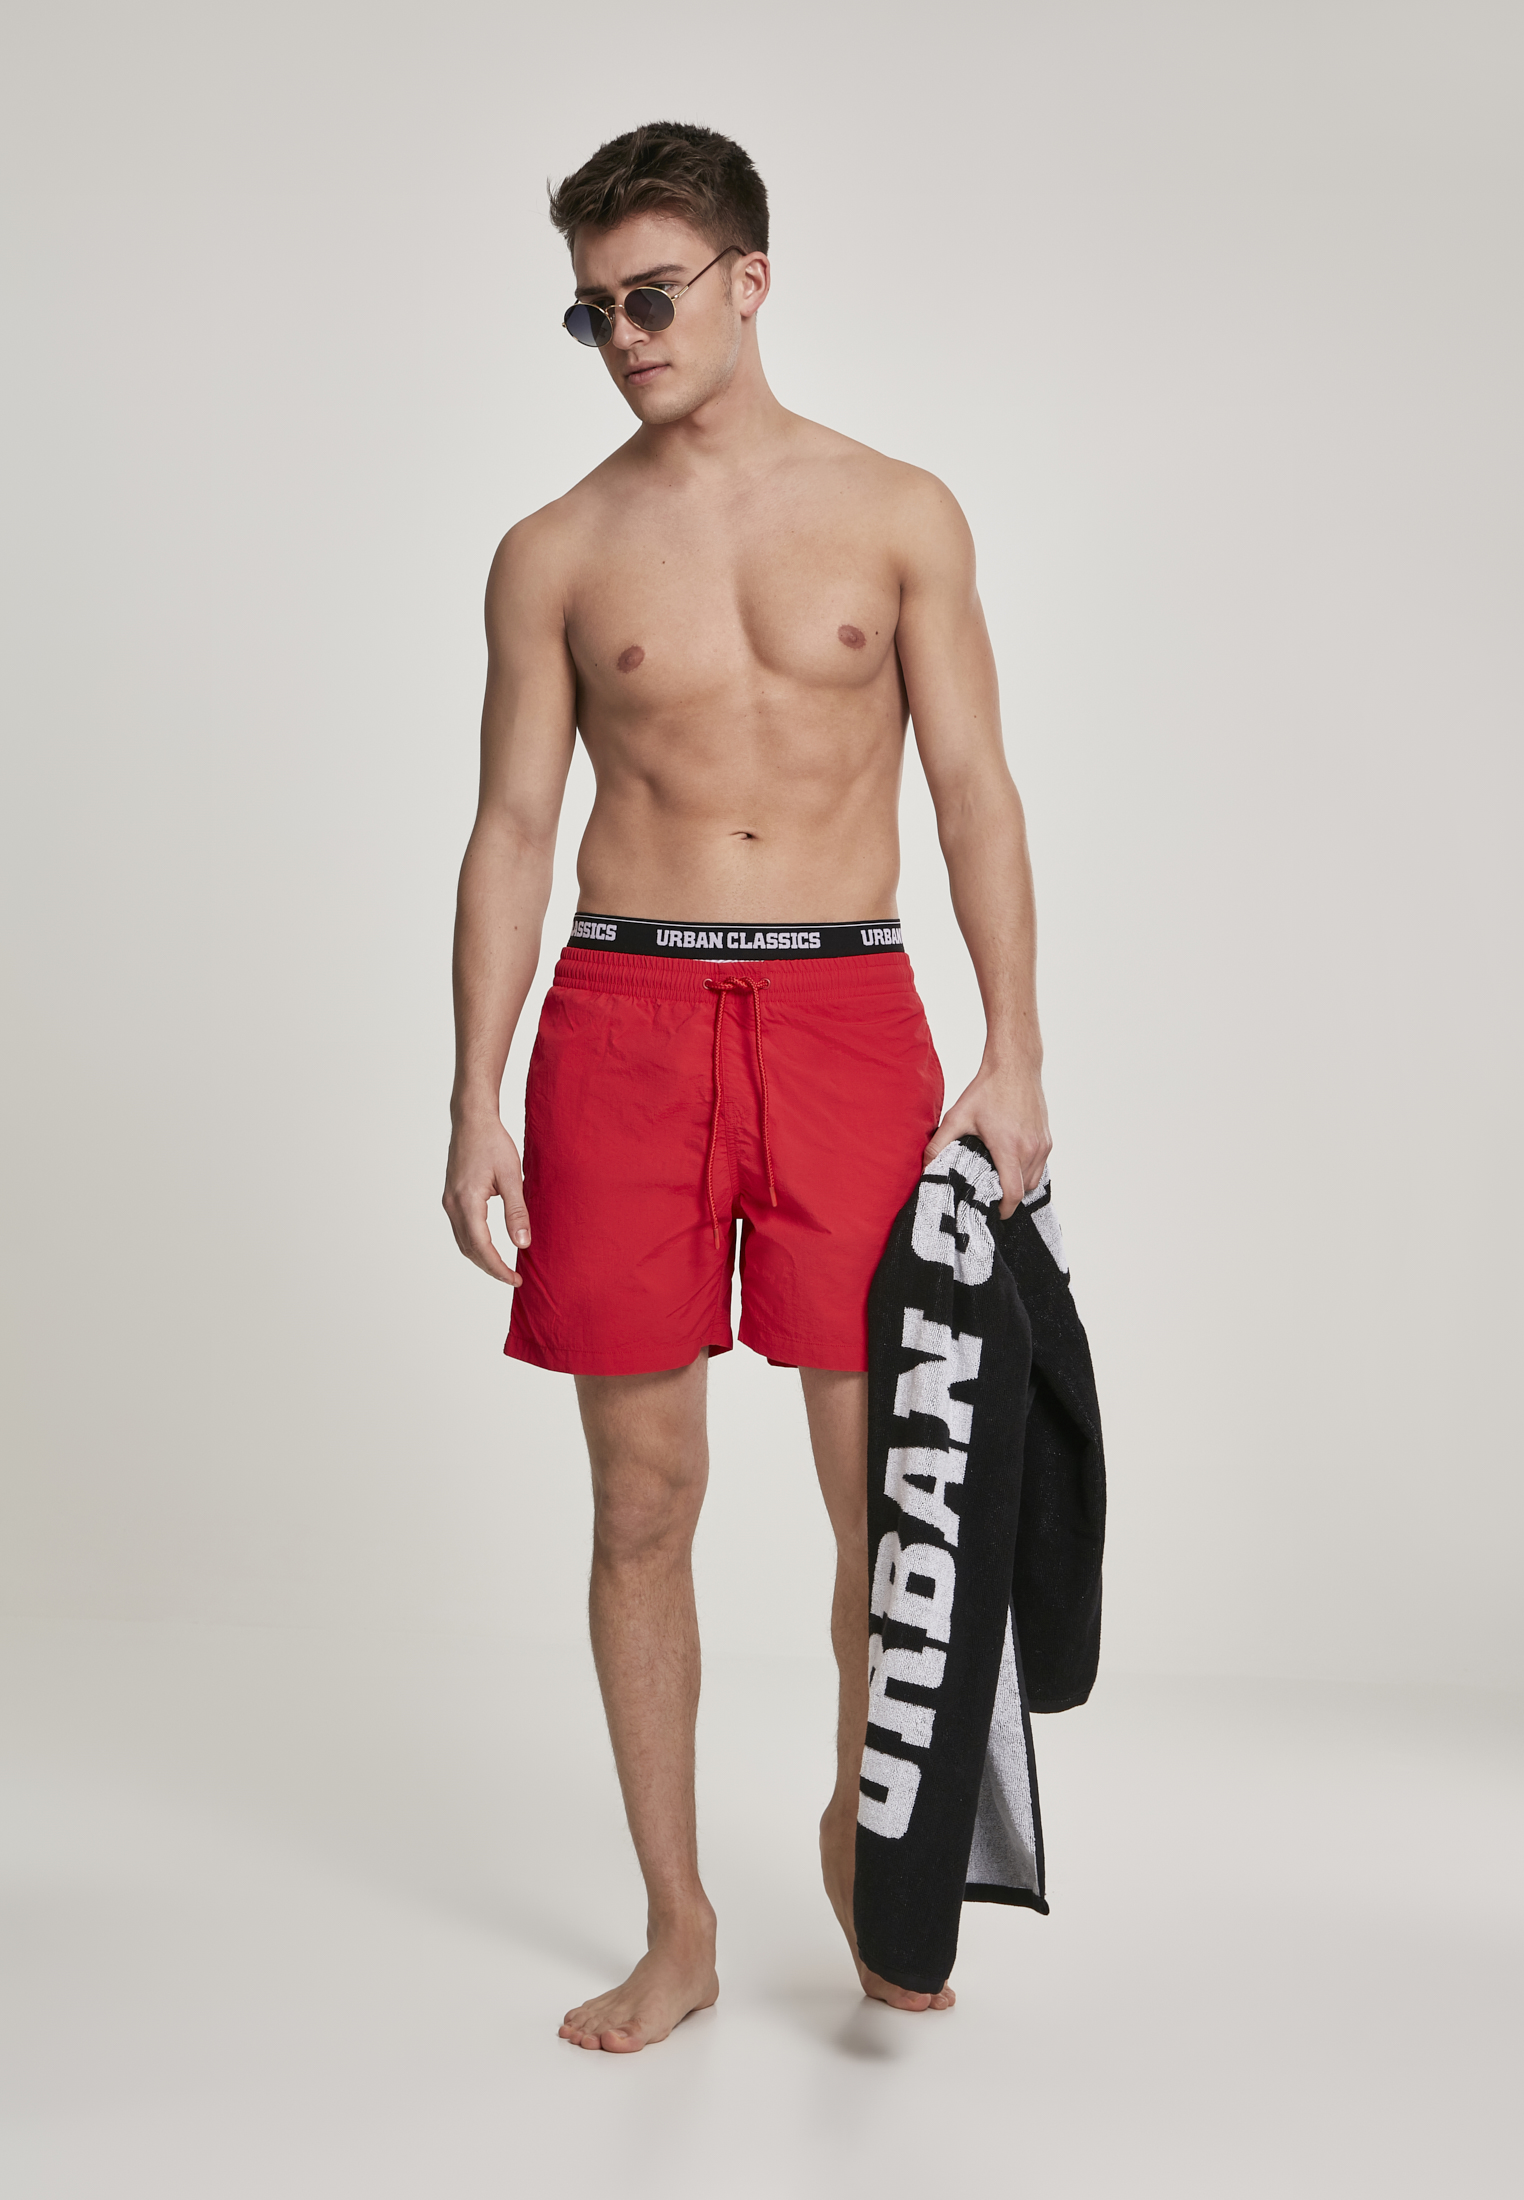 Bademode Two in One Swim Shorts in Farbe firered/wht/blk